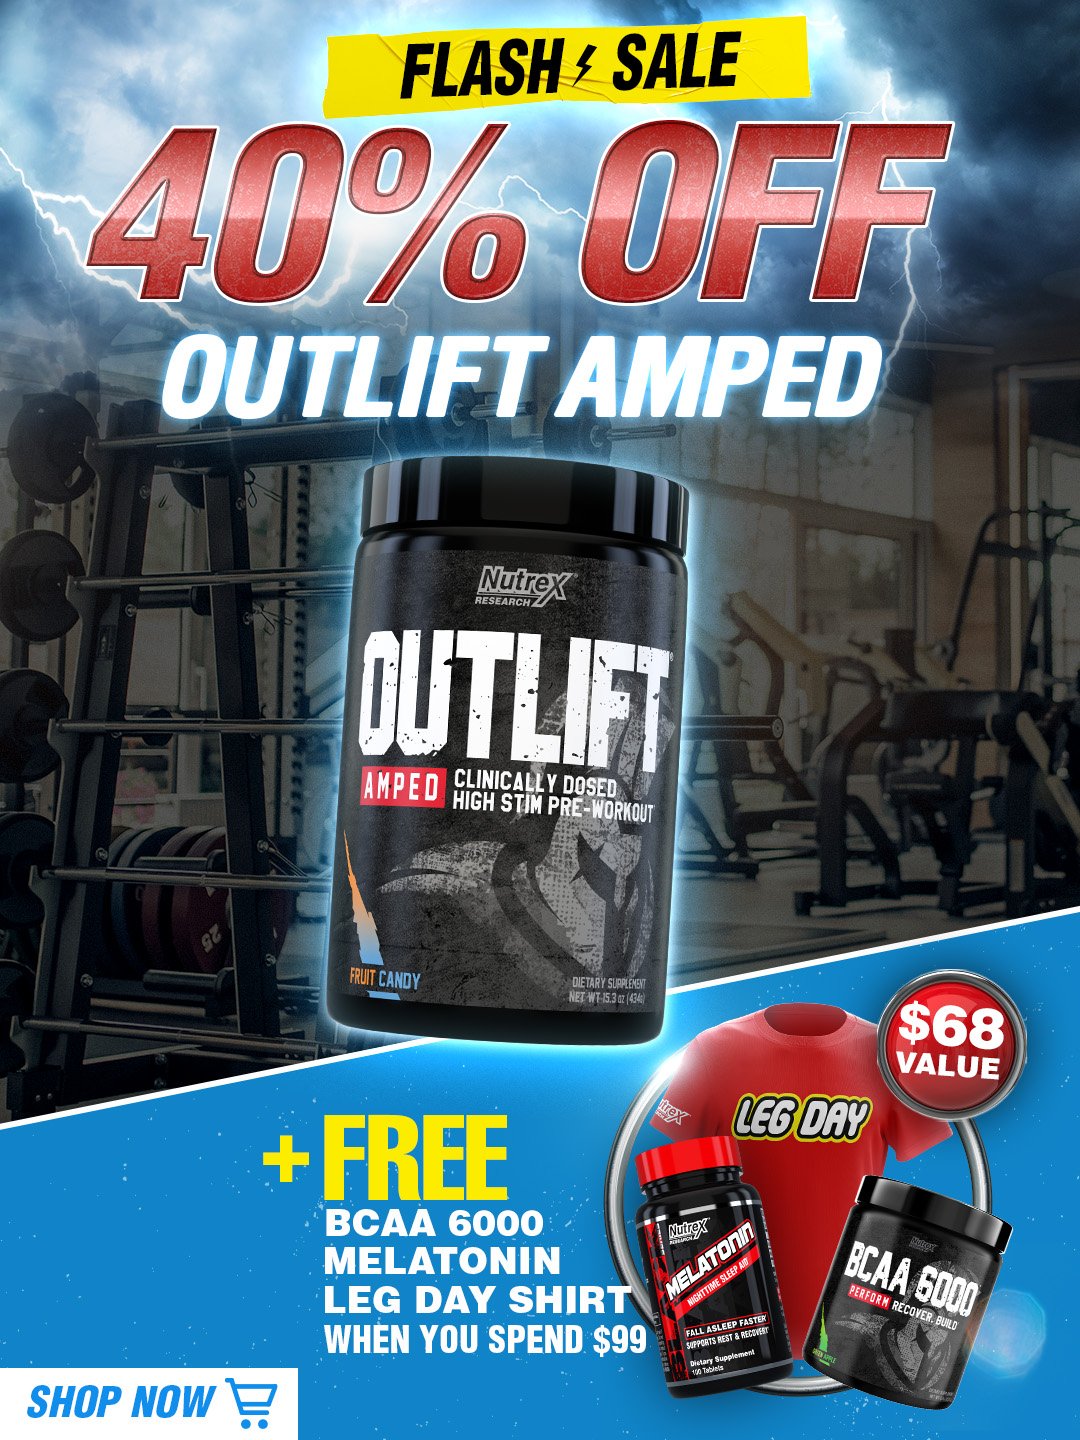 40% off Outlift Amped